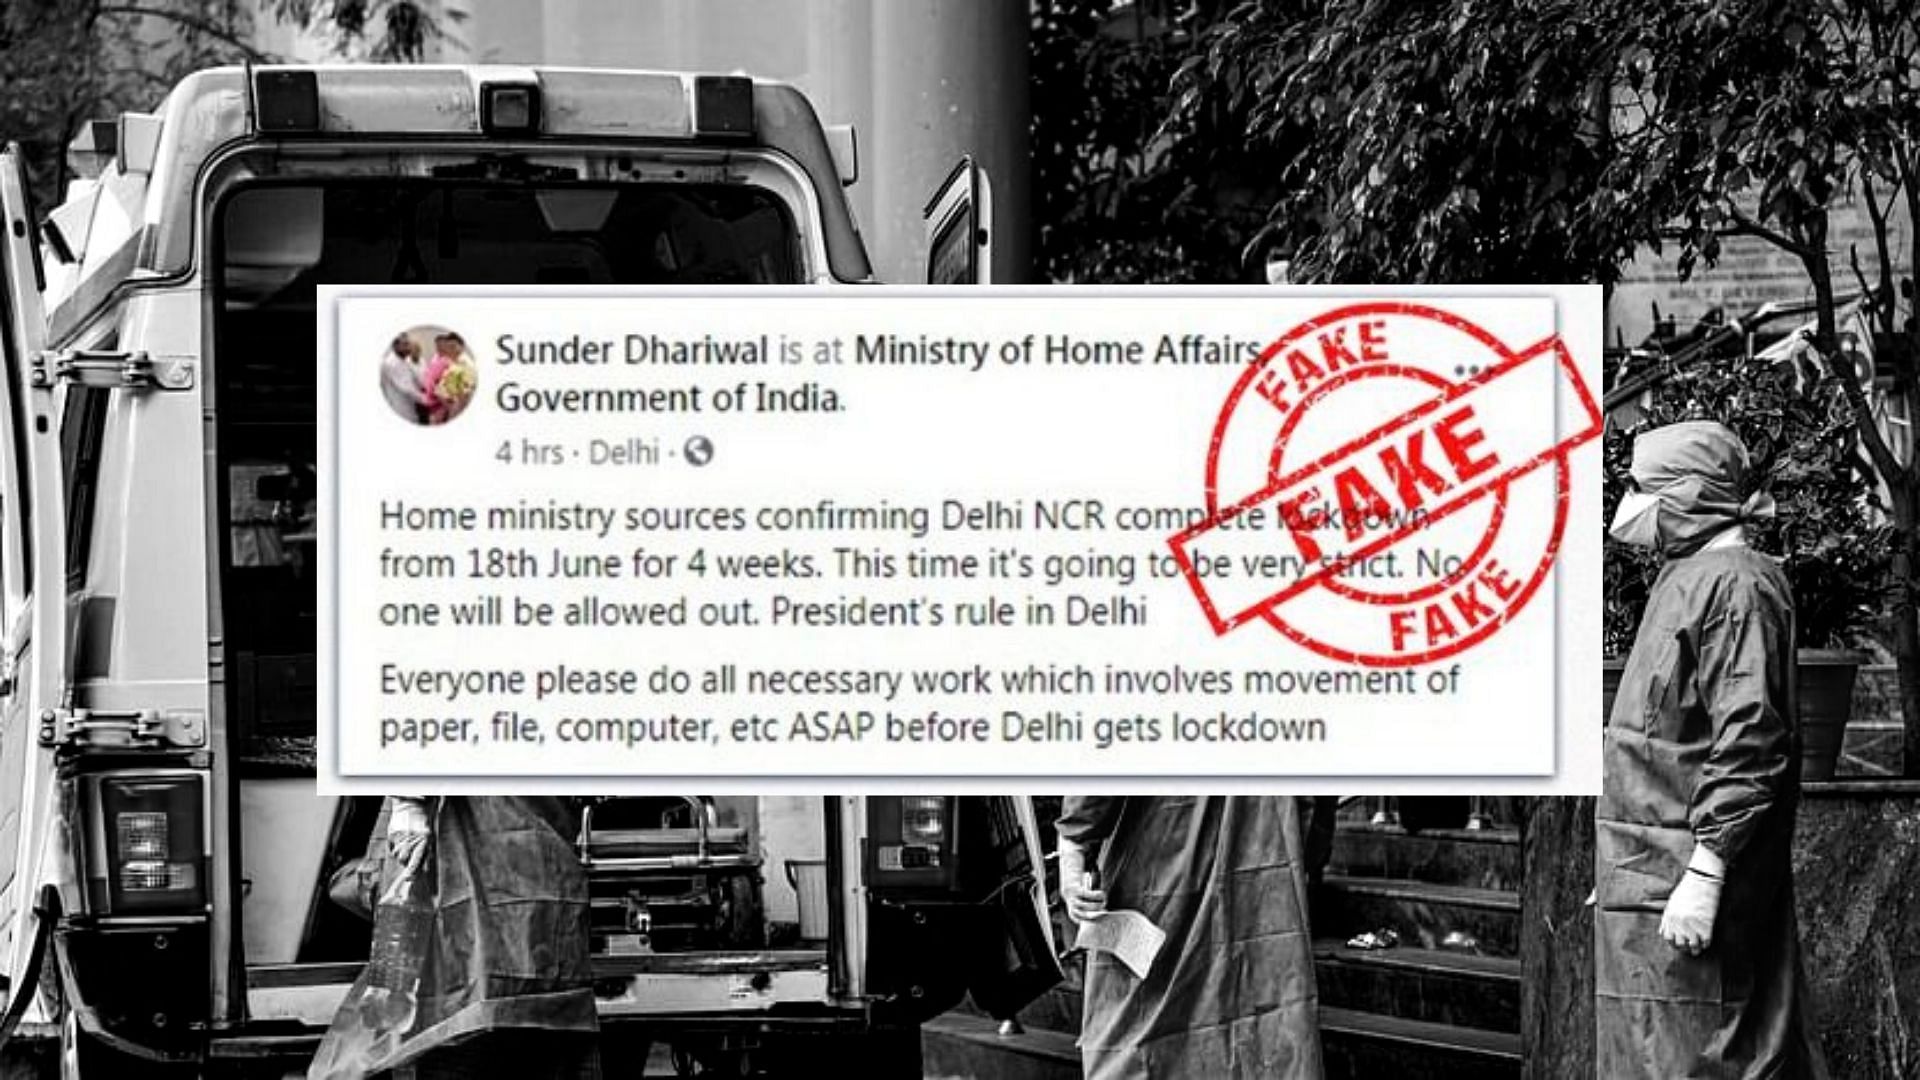 The Ministry of Home Affairs has denied rumours suggesting the implementation of a complete lockdown in Delhi NCR region from 18 June. 